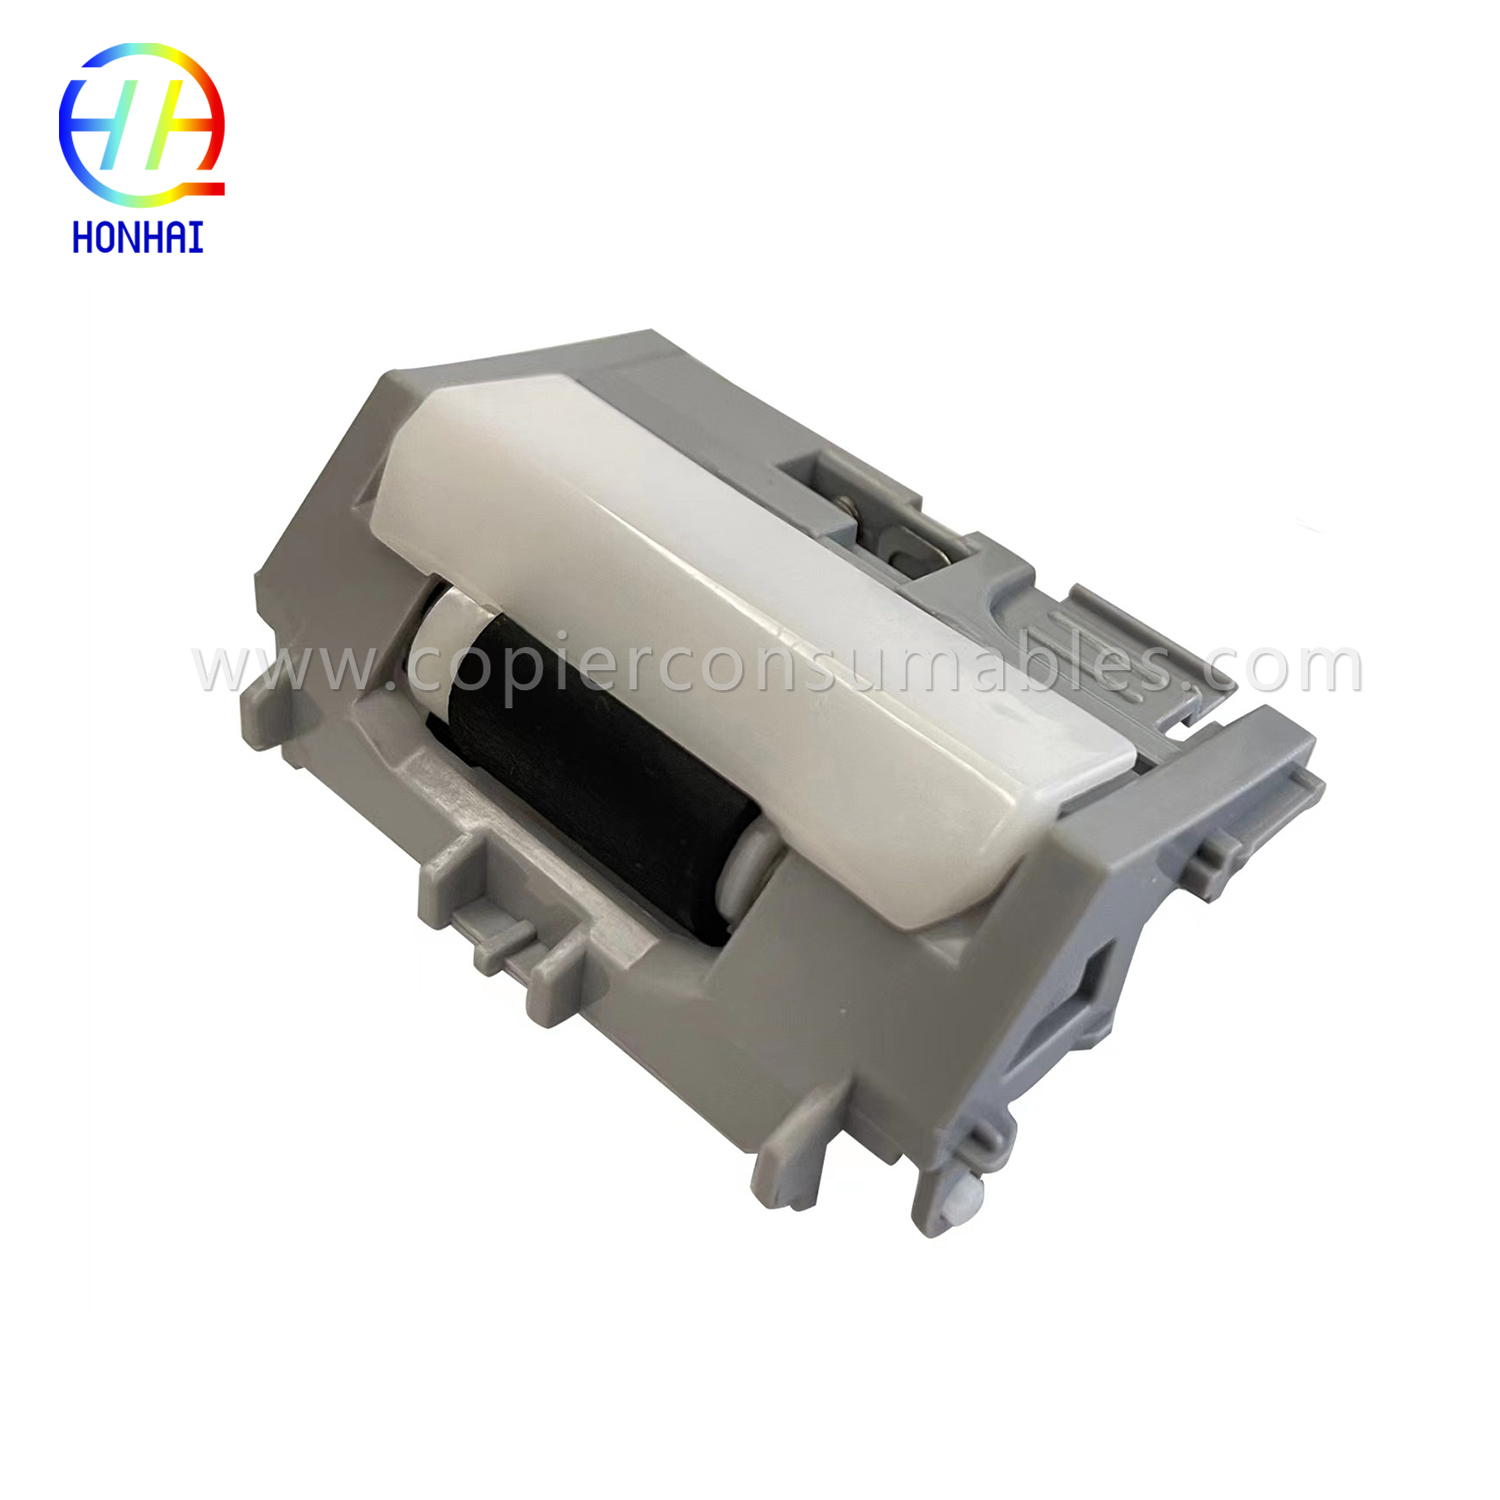 Tray 2 3 Separation Roller Assembly kwa HP Laserjet PRO M402dn M402dw M402n M403D M403dn M403dw M403n M501dn M501n Mfp-M426dw M426fdn M426fd50-520RM-503DW